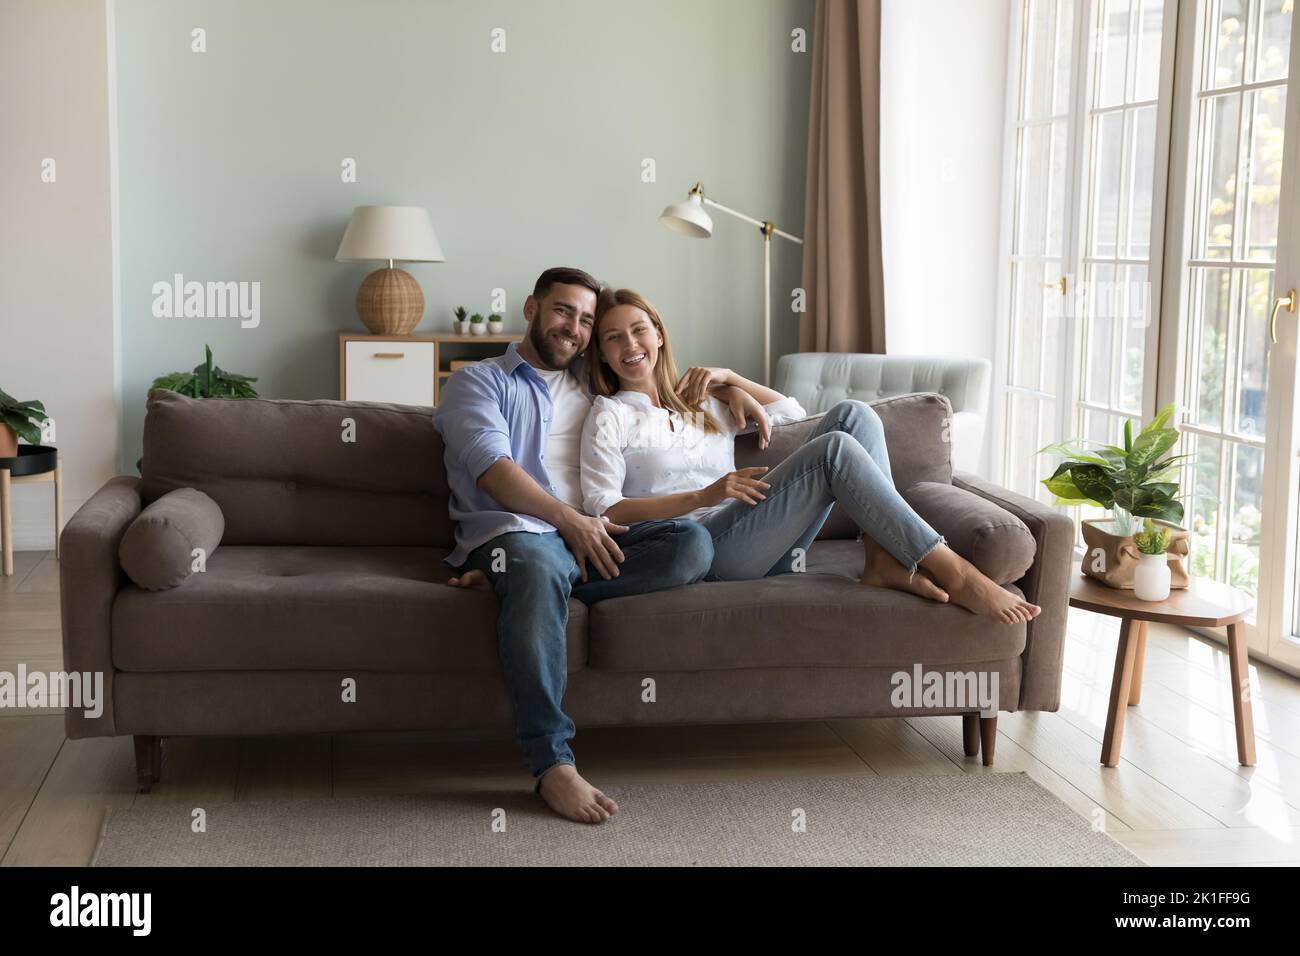 Happy young millennial couple of homeowners resting on comfortable sofa Stock Photo